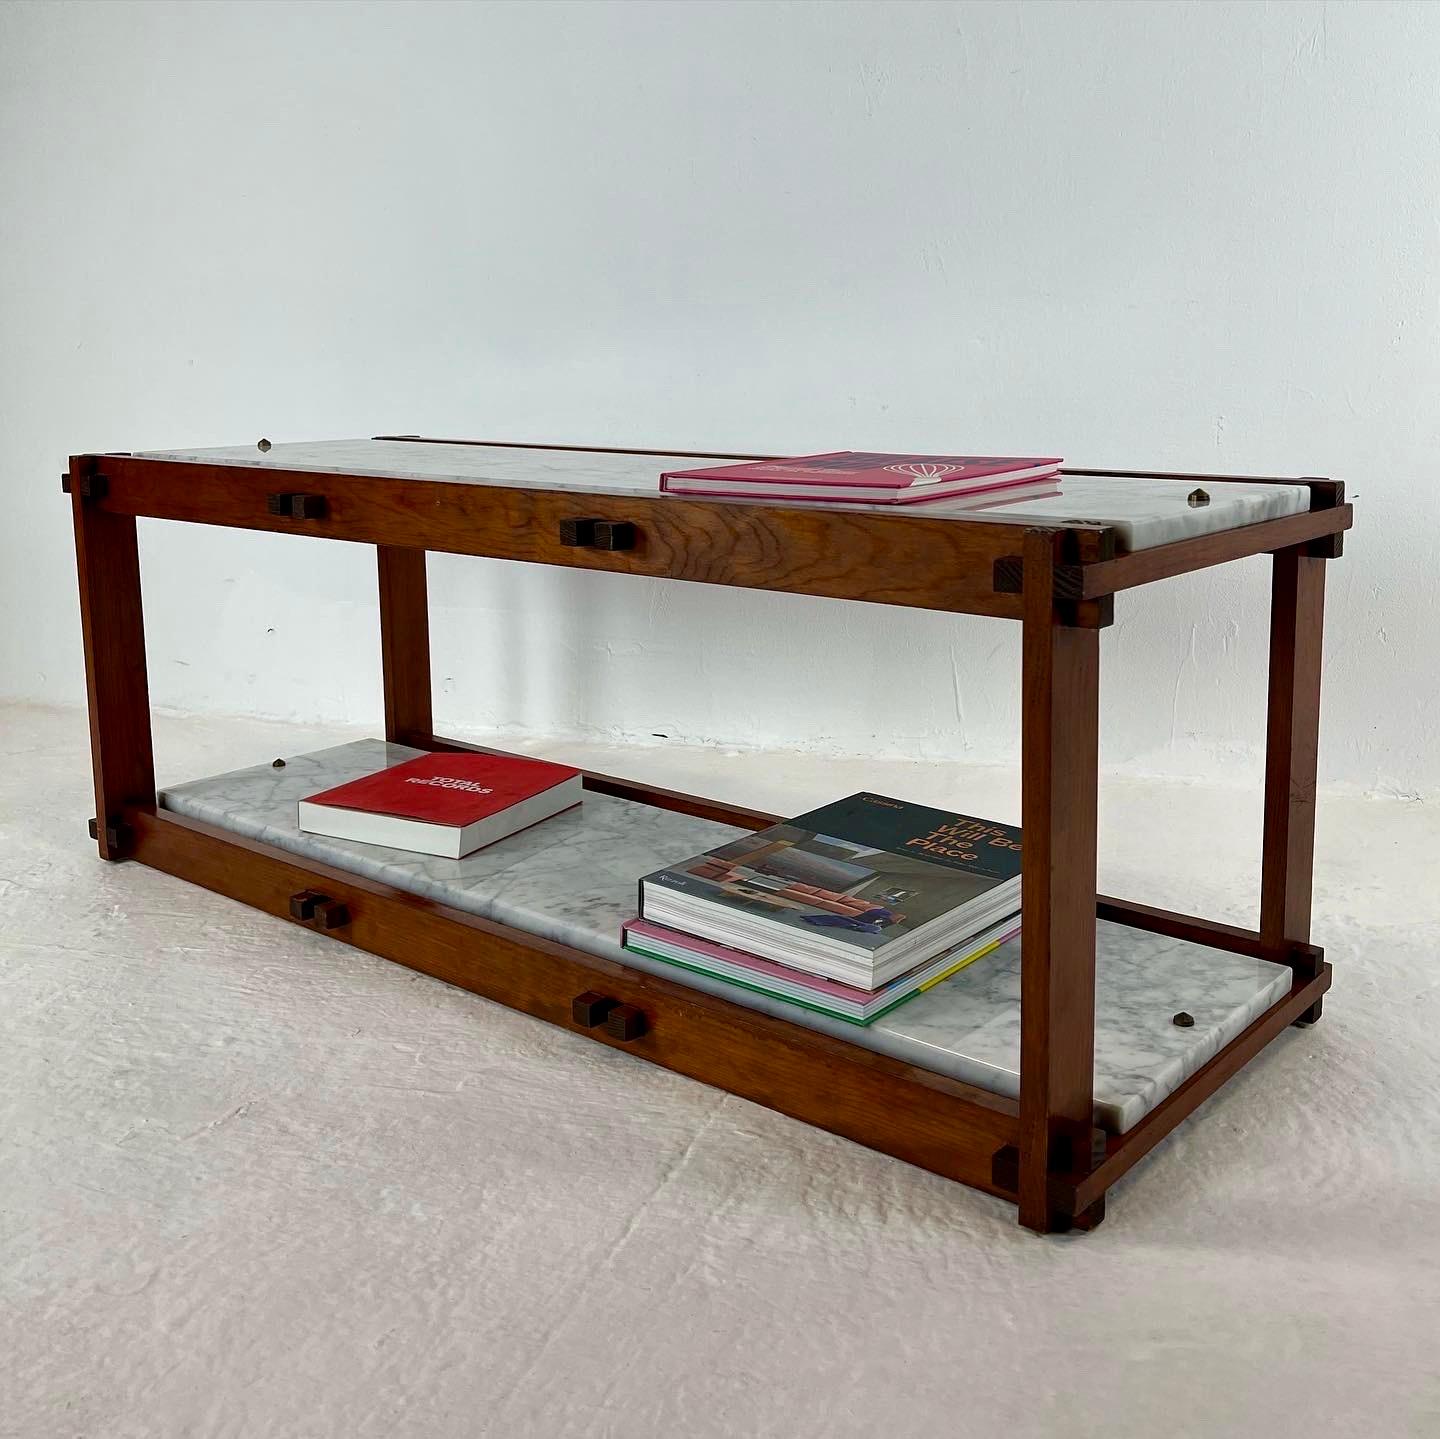 Superb modernist shelf from the 80s with interlocking reminiscent of the creations of sornay or chapo. It is adorned with two white marble tops in perfect condition, without any scratches with a shiny finish. A very beautiful highly decorative